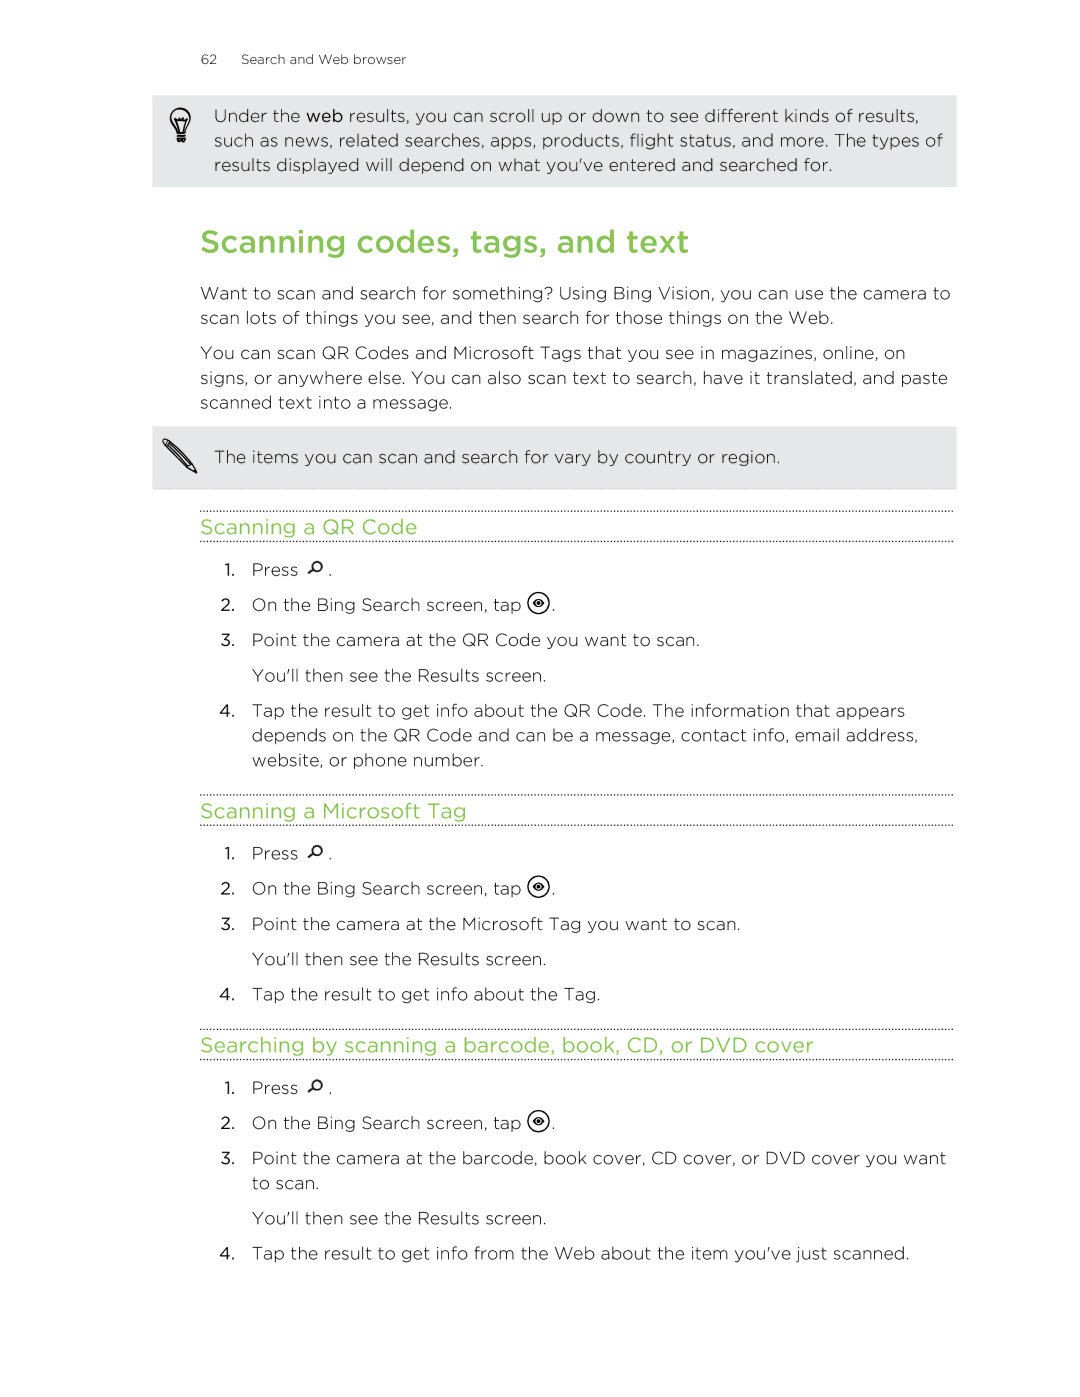 HTC 8X manual Scanning codes, tags, and text, Scanning a QR Code, Scanning a Microsoft Tag 